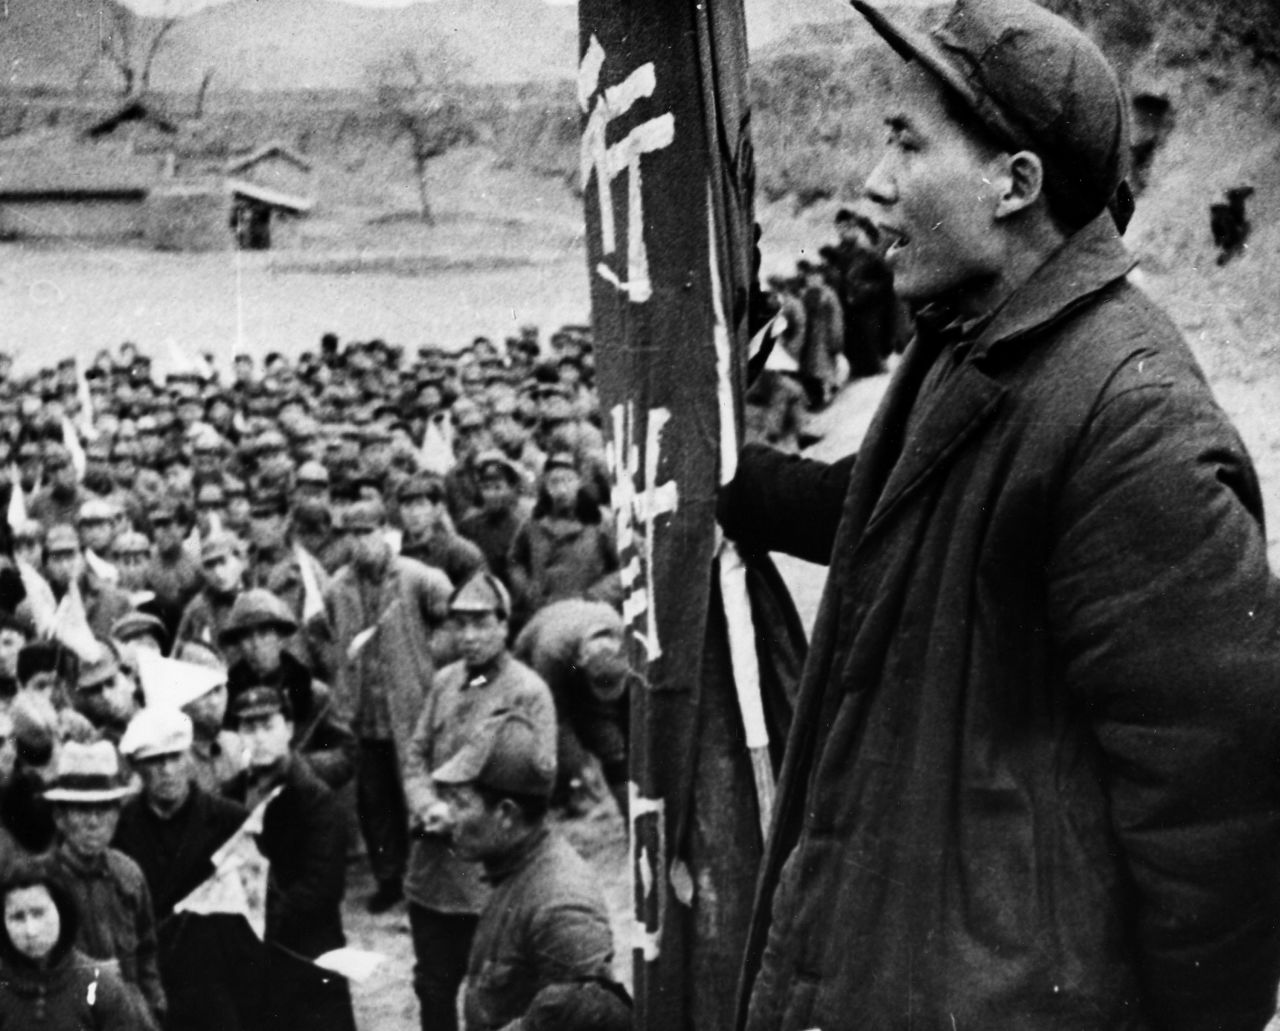 Mao speaks to followers in Yan'an. After the Long March, Mao became the undisputed Chinese Communist leader, even through military setbacks and internal political purges. Yan'an, in northern China, became the communists' stronghold for the next decade.